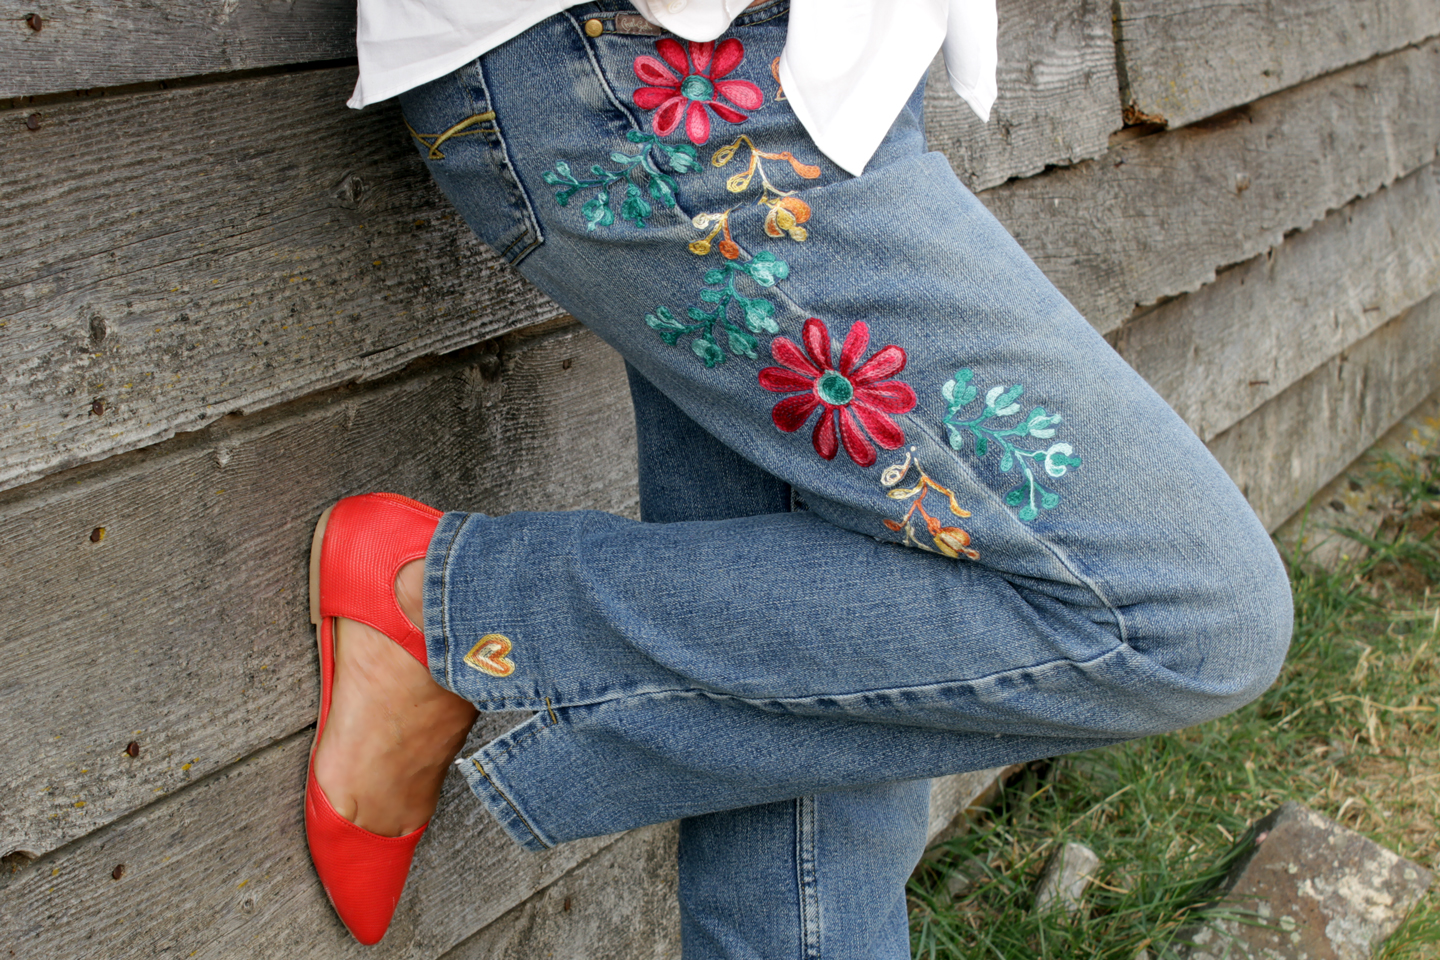 Floral Embroidered Jeans DIY